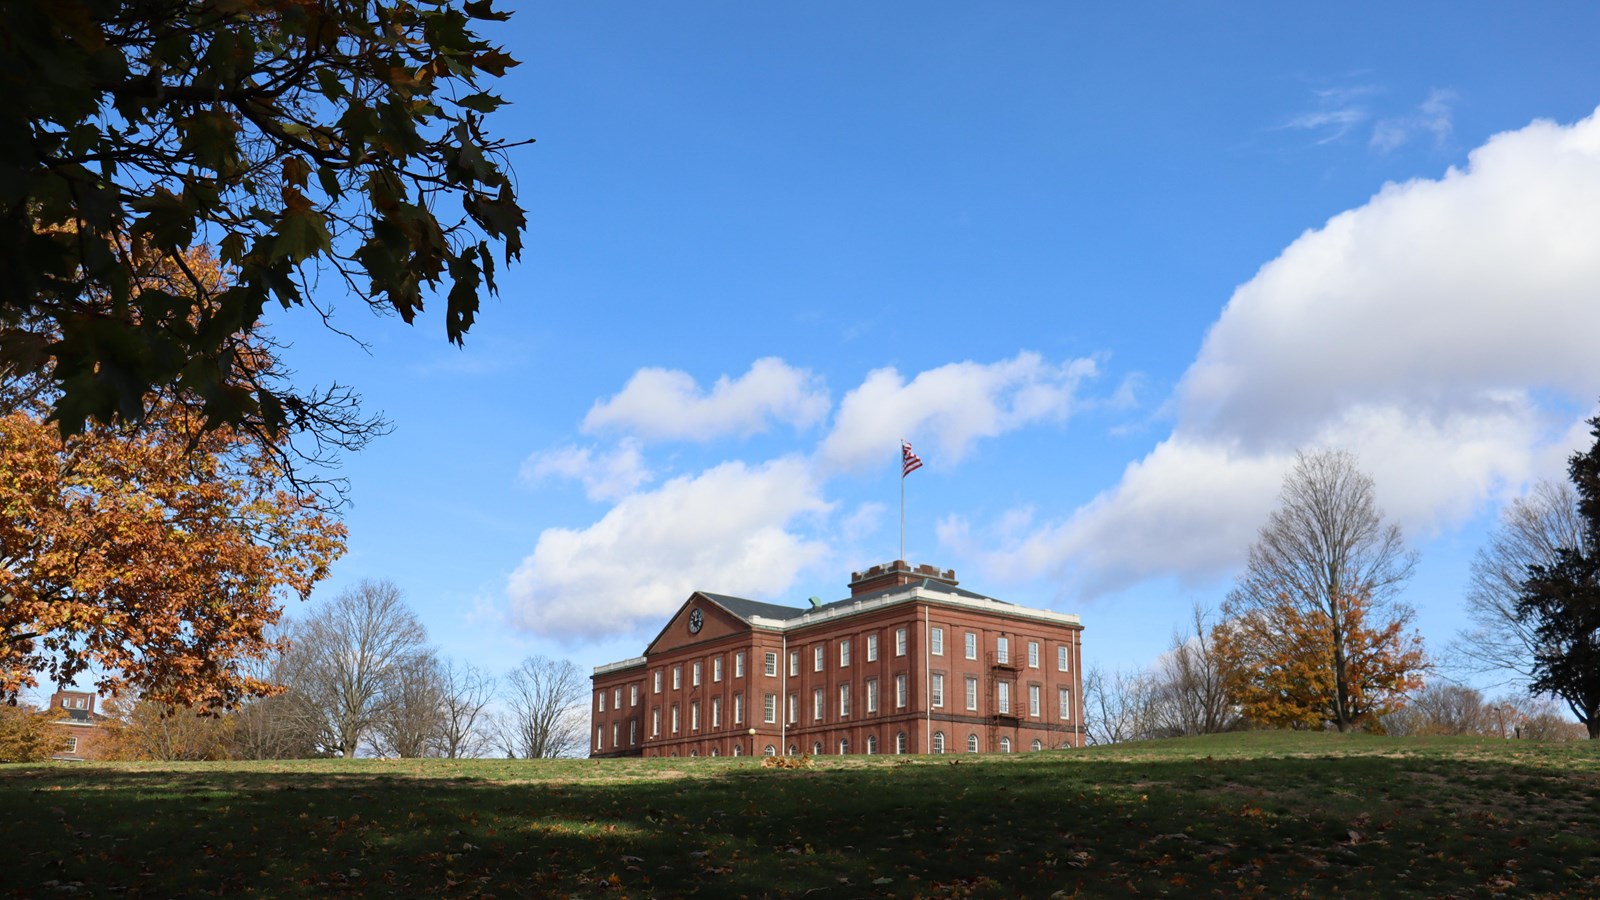 The Main Arsenal Building,  on a hill with a blue sky and clouds with trees framing the image.